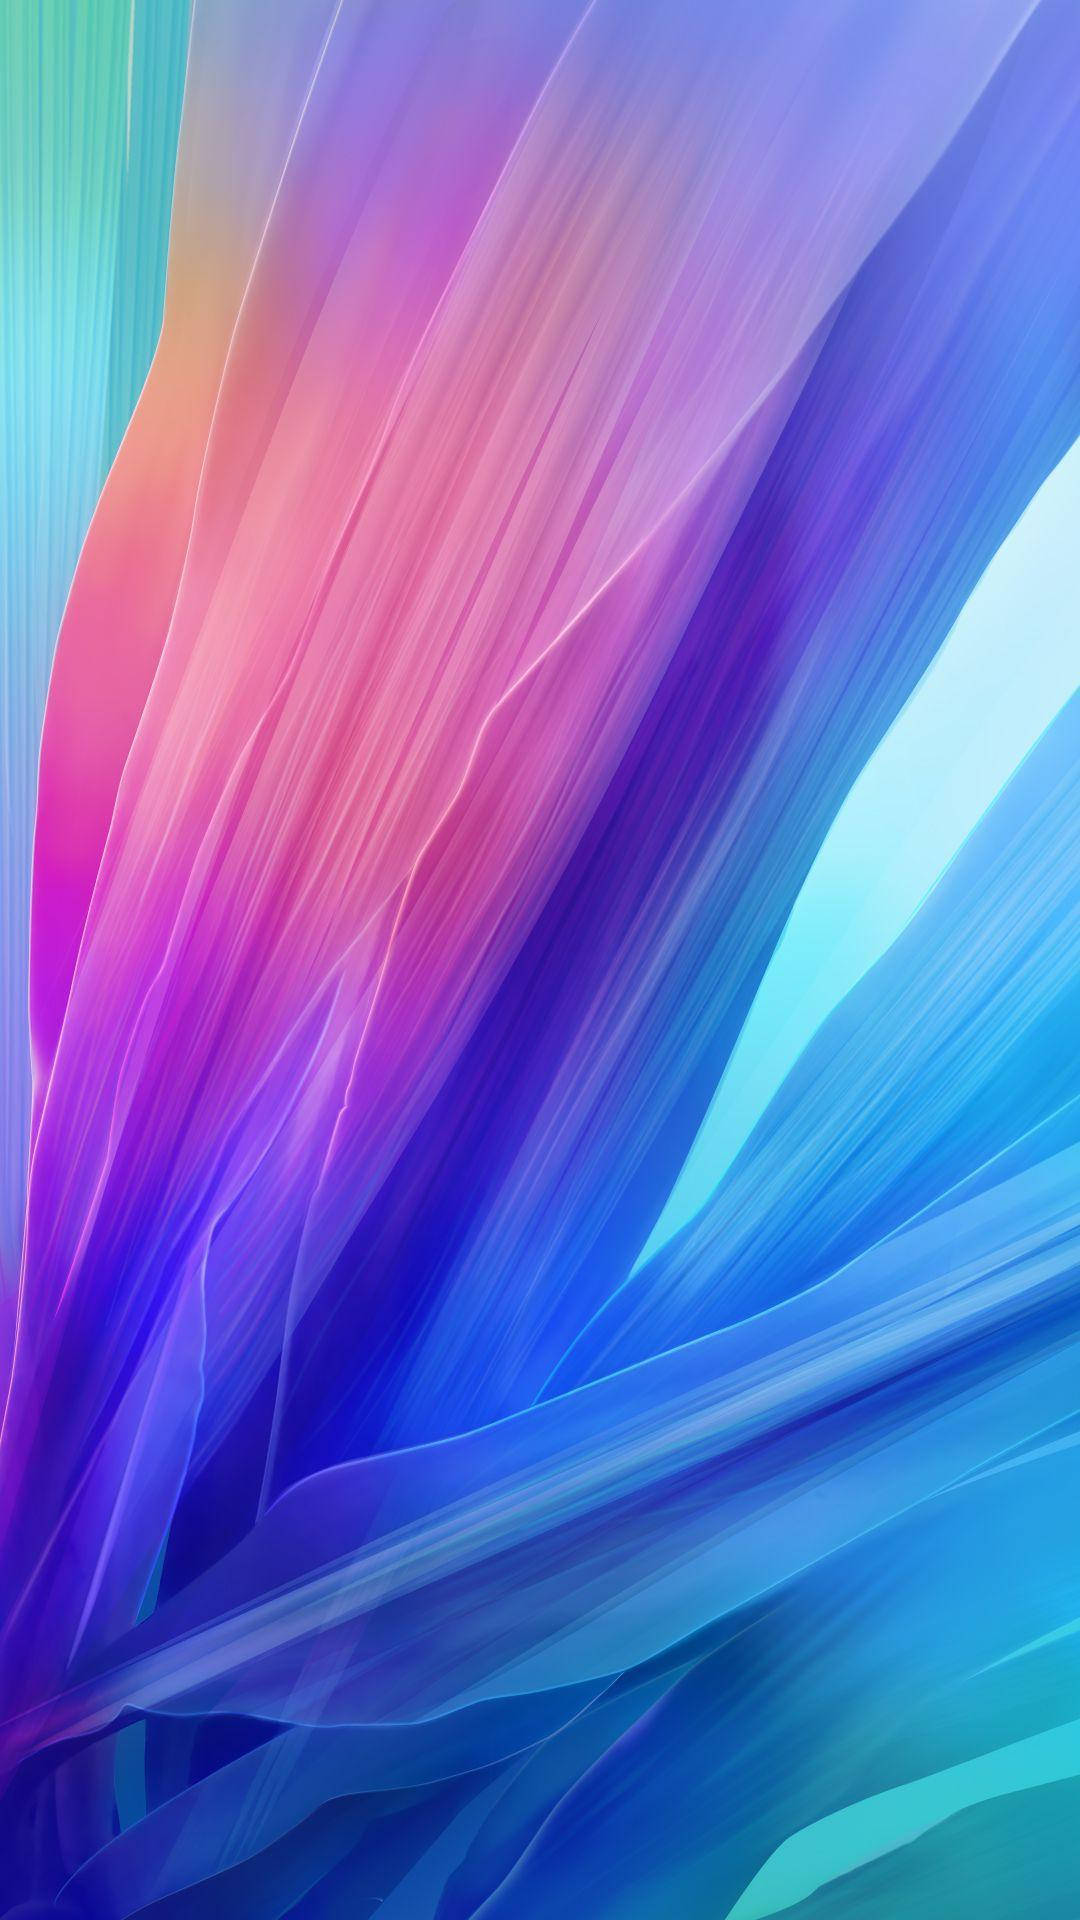 Mermaid-colored Feathers Iphone 8 Live Wallpaper